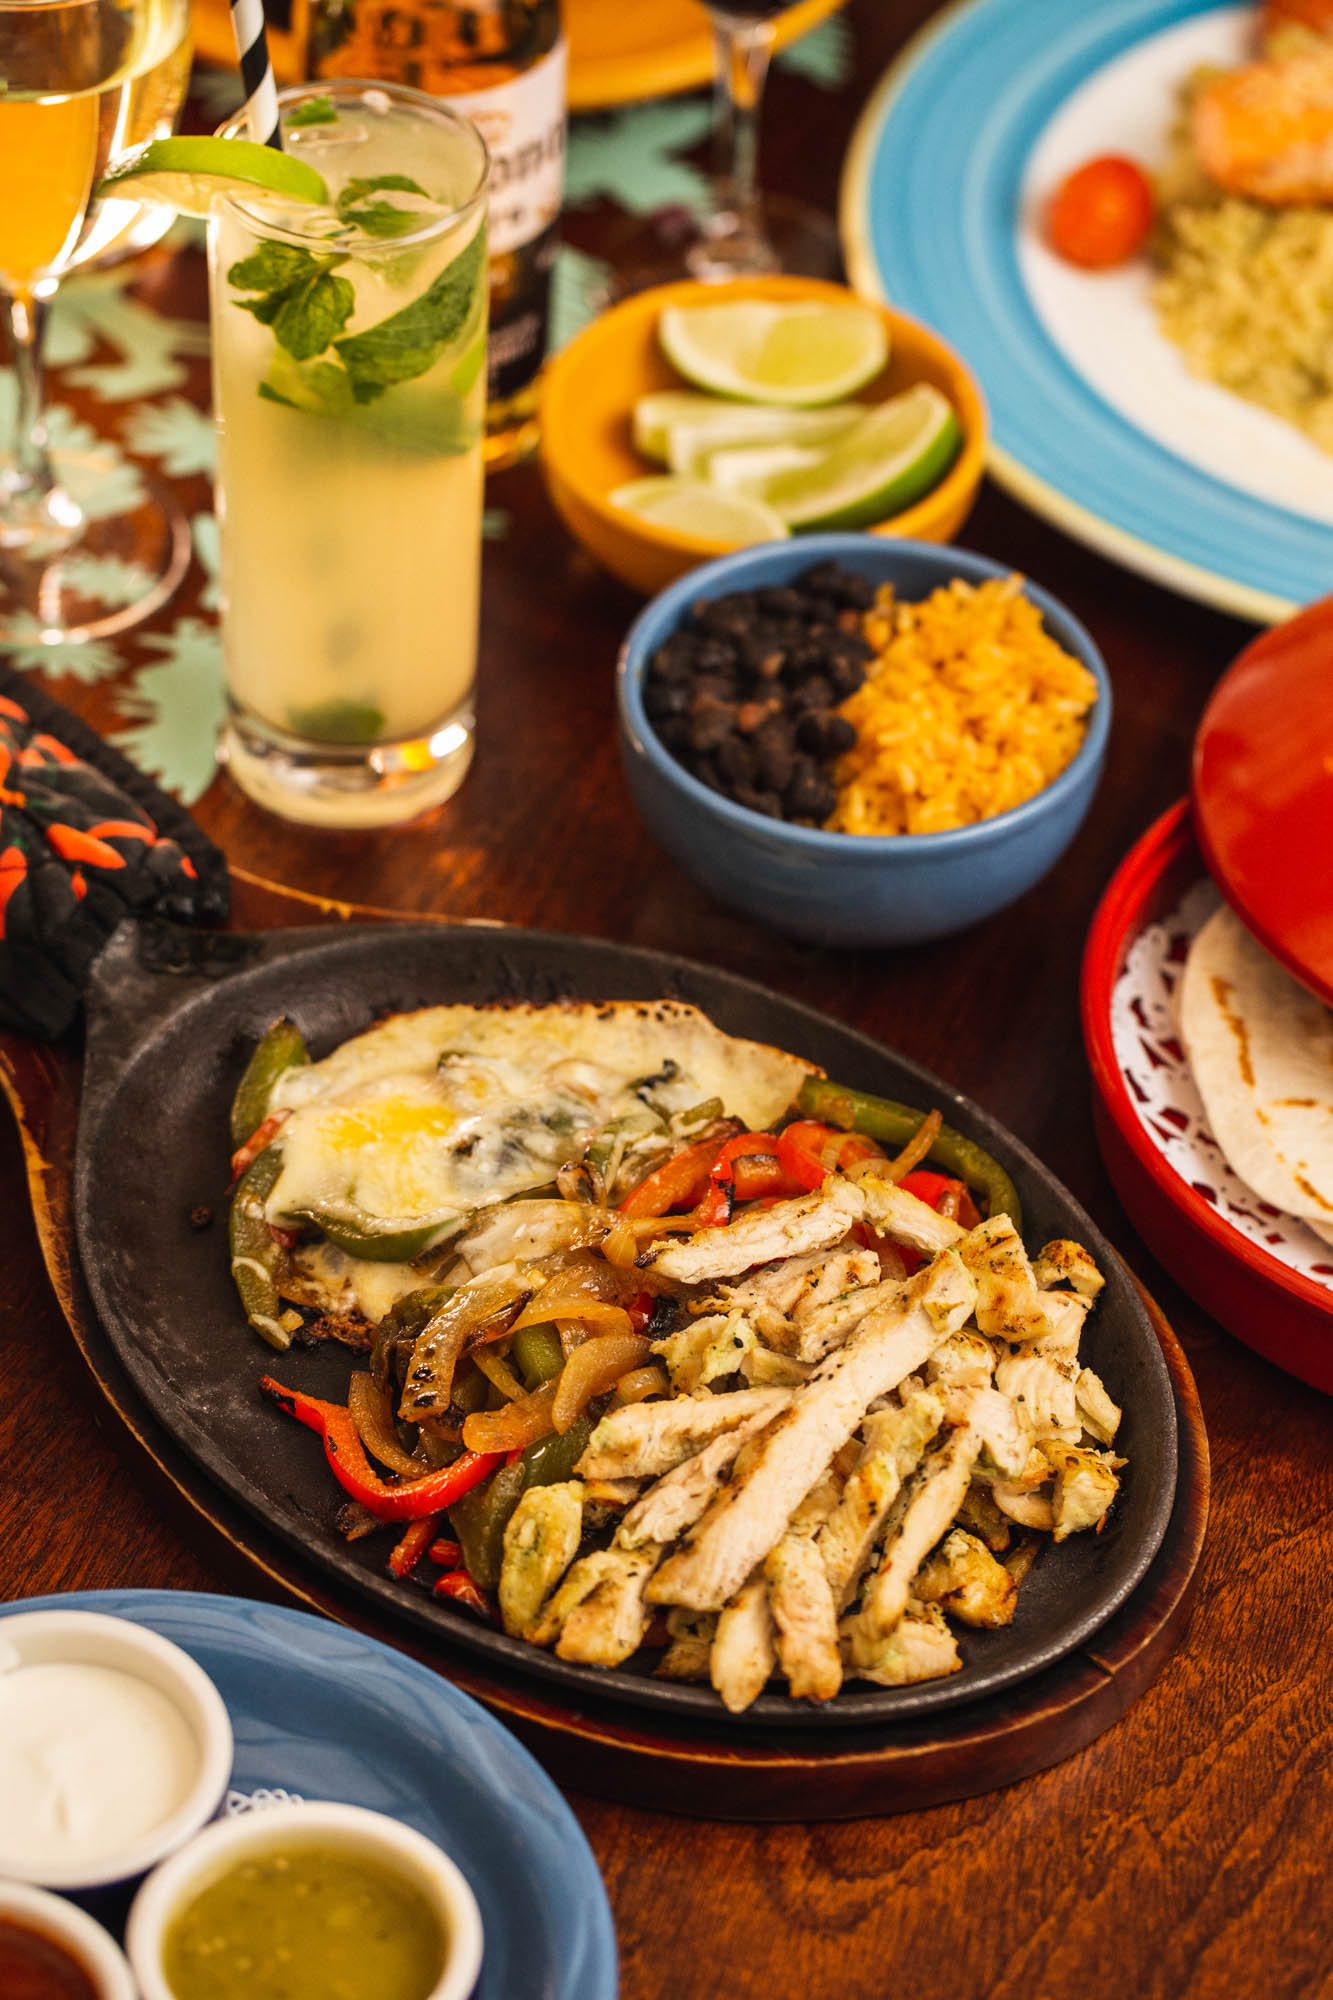 Chicken fajita plate, on the table with side dishes and drinks